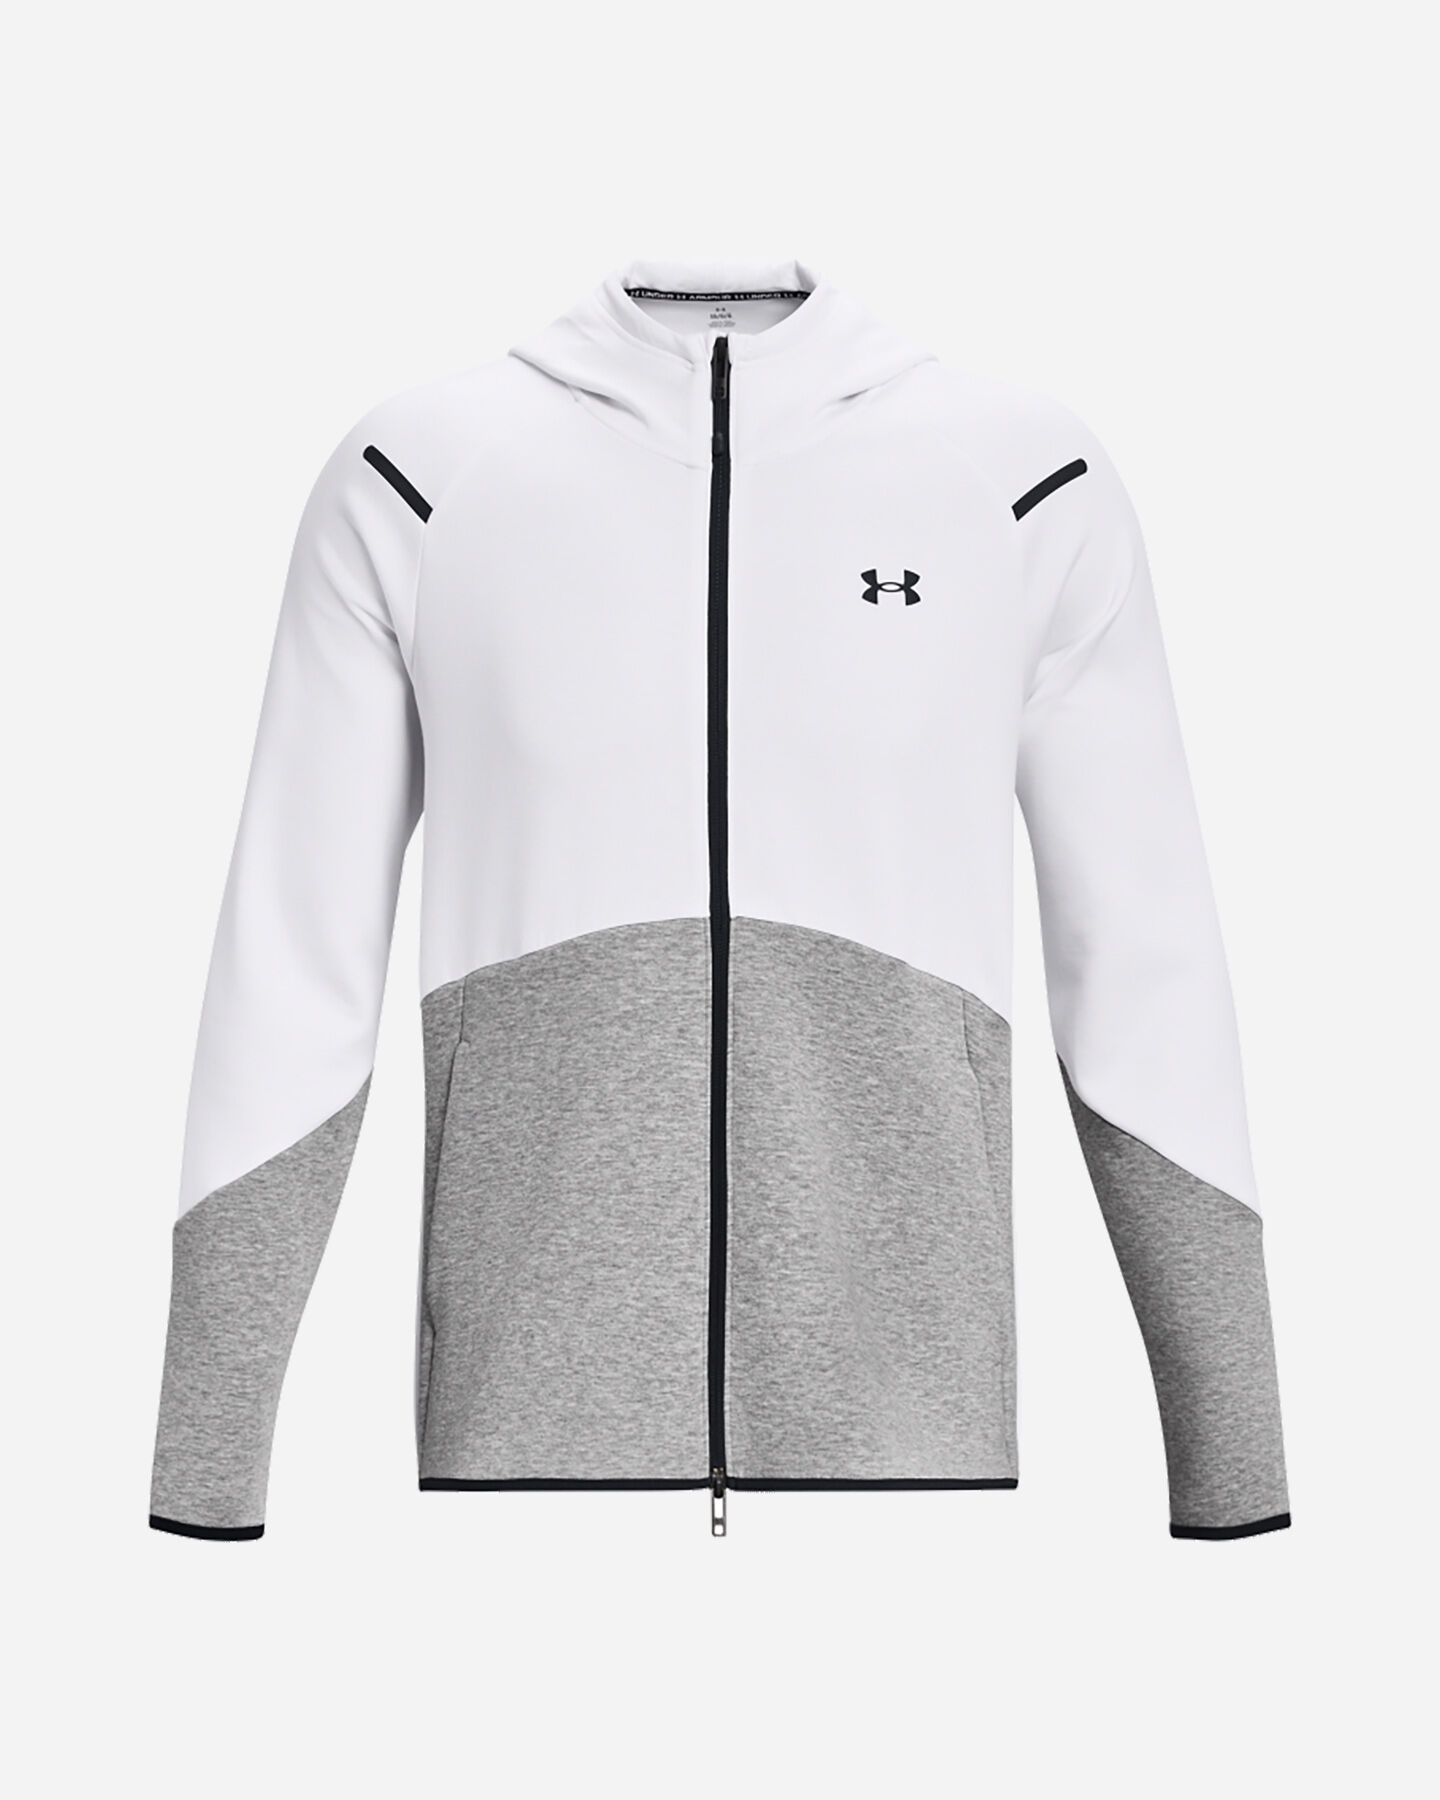  Felpa UNDER ARMOUR UNSTOPPABLEKNIT M S5579651|0012|MD scatto 0